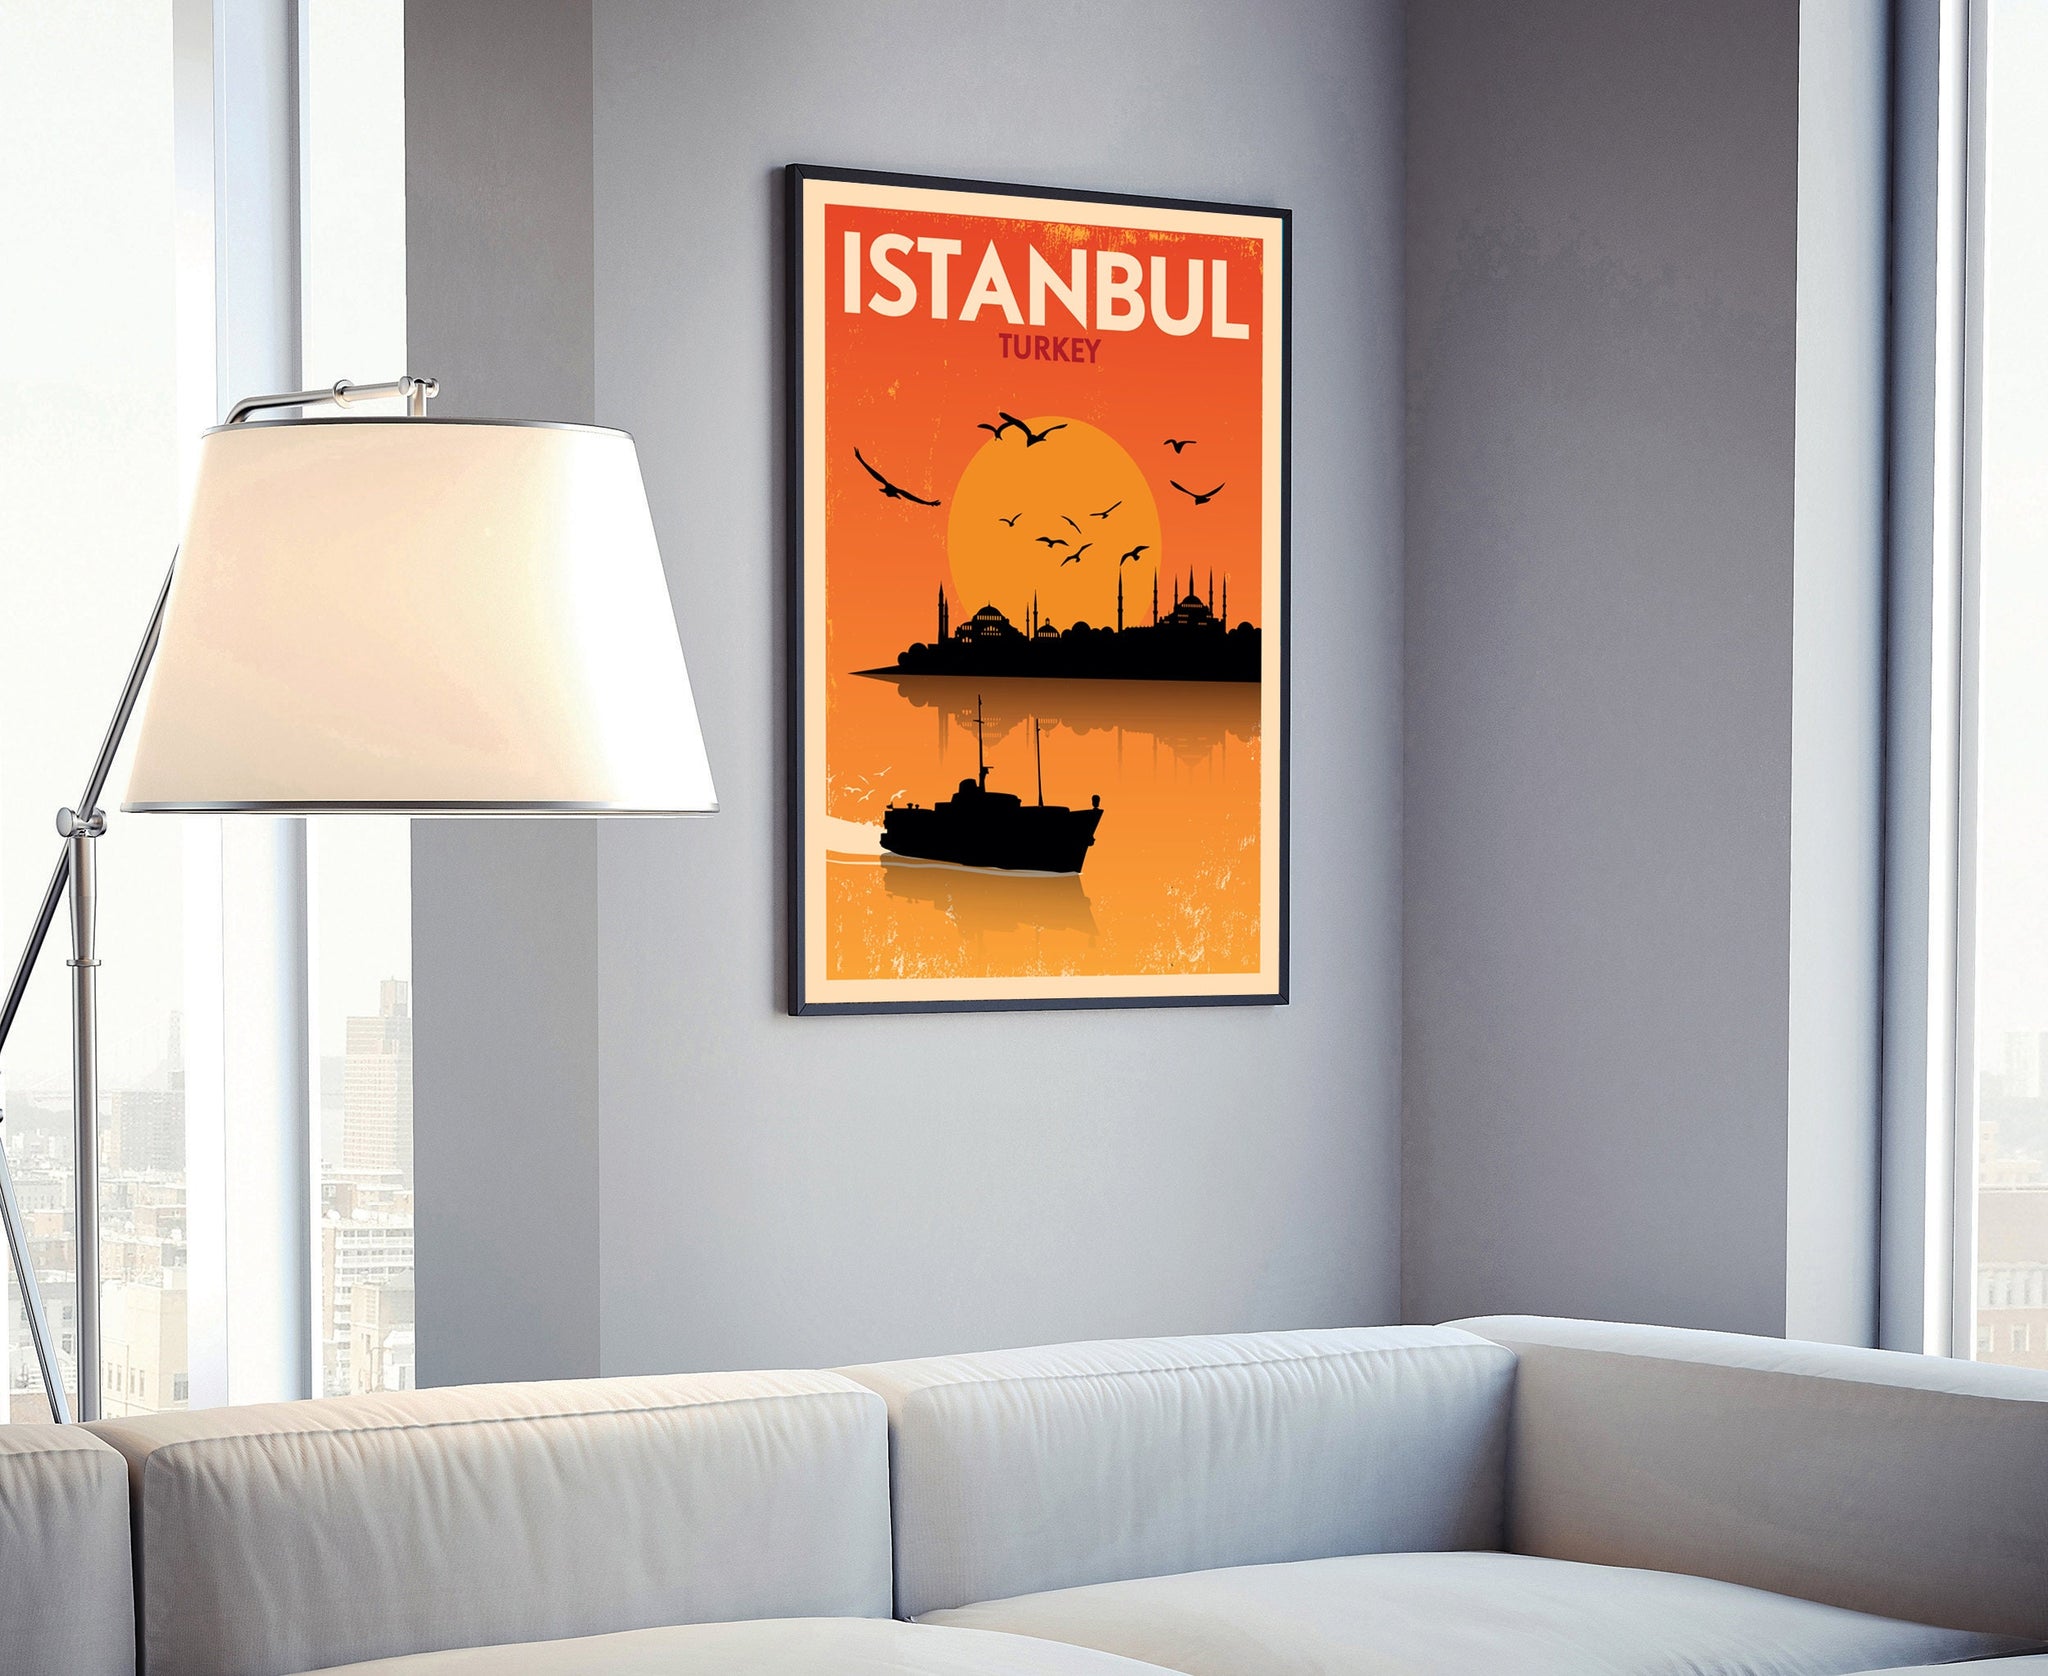 Retro Style Travel Poster, Turkey - Istanbul Vintage Rustic Poster Print, Home Wall Art, Office Wall Decors, Posters, Turkey, State  Posters